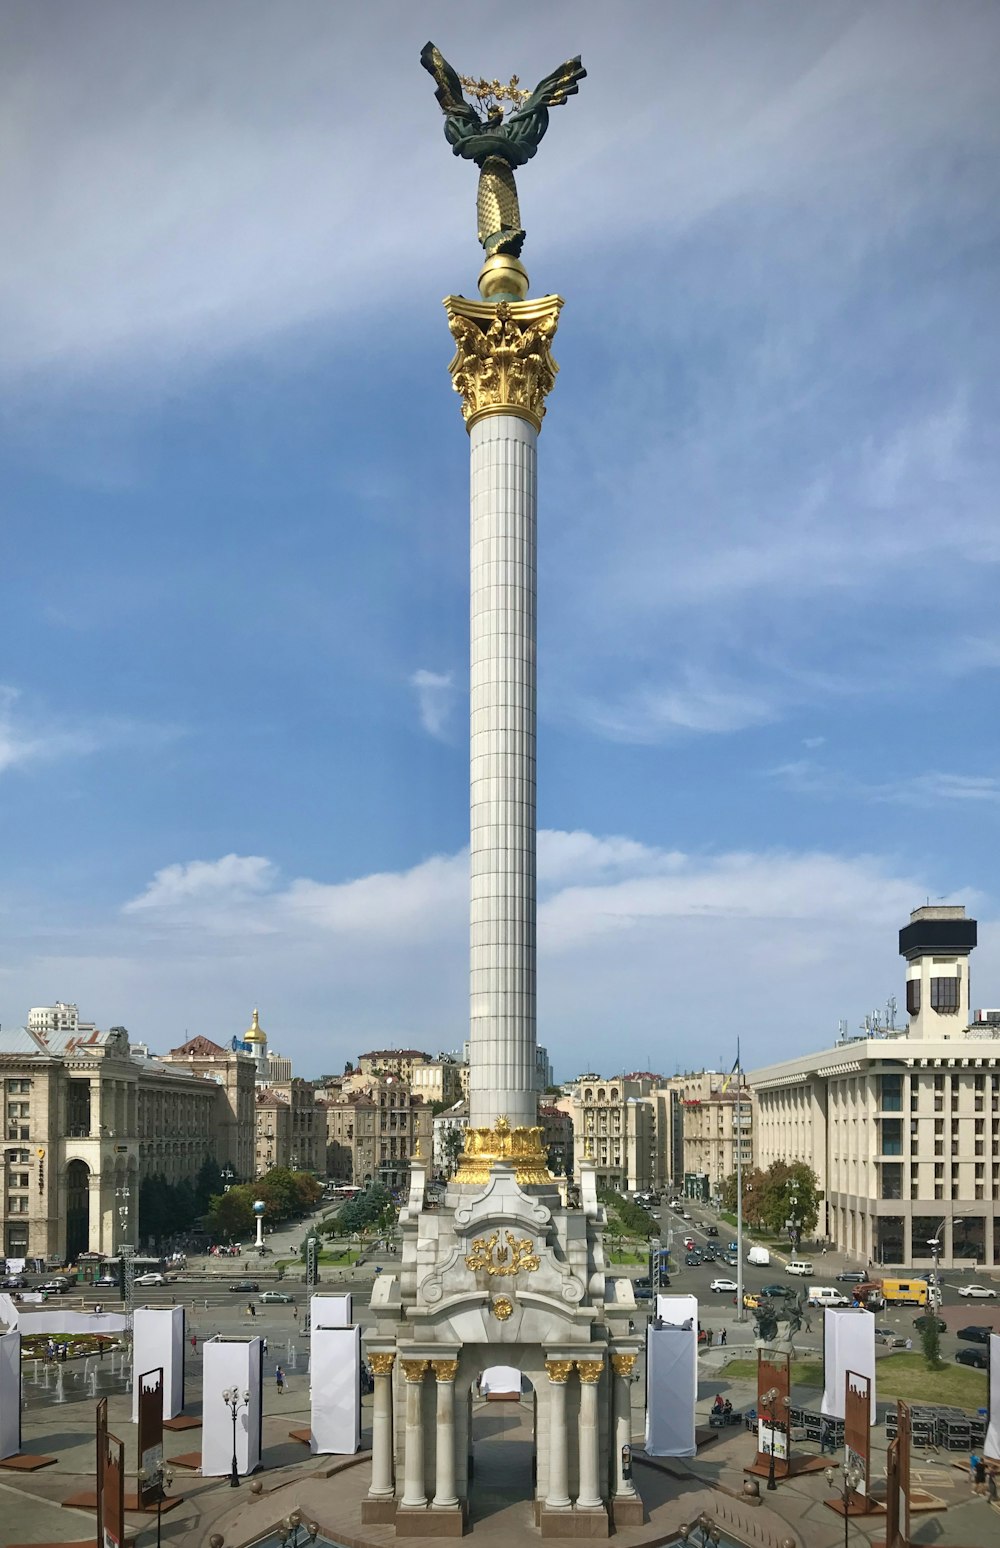 a statue of an eagle on top of a column